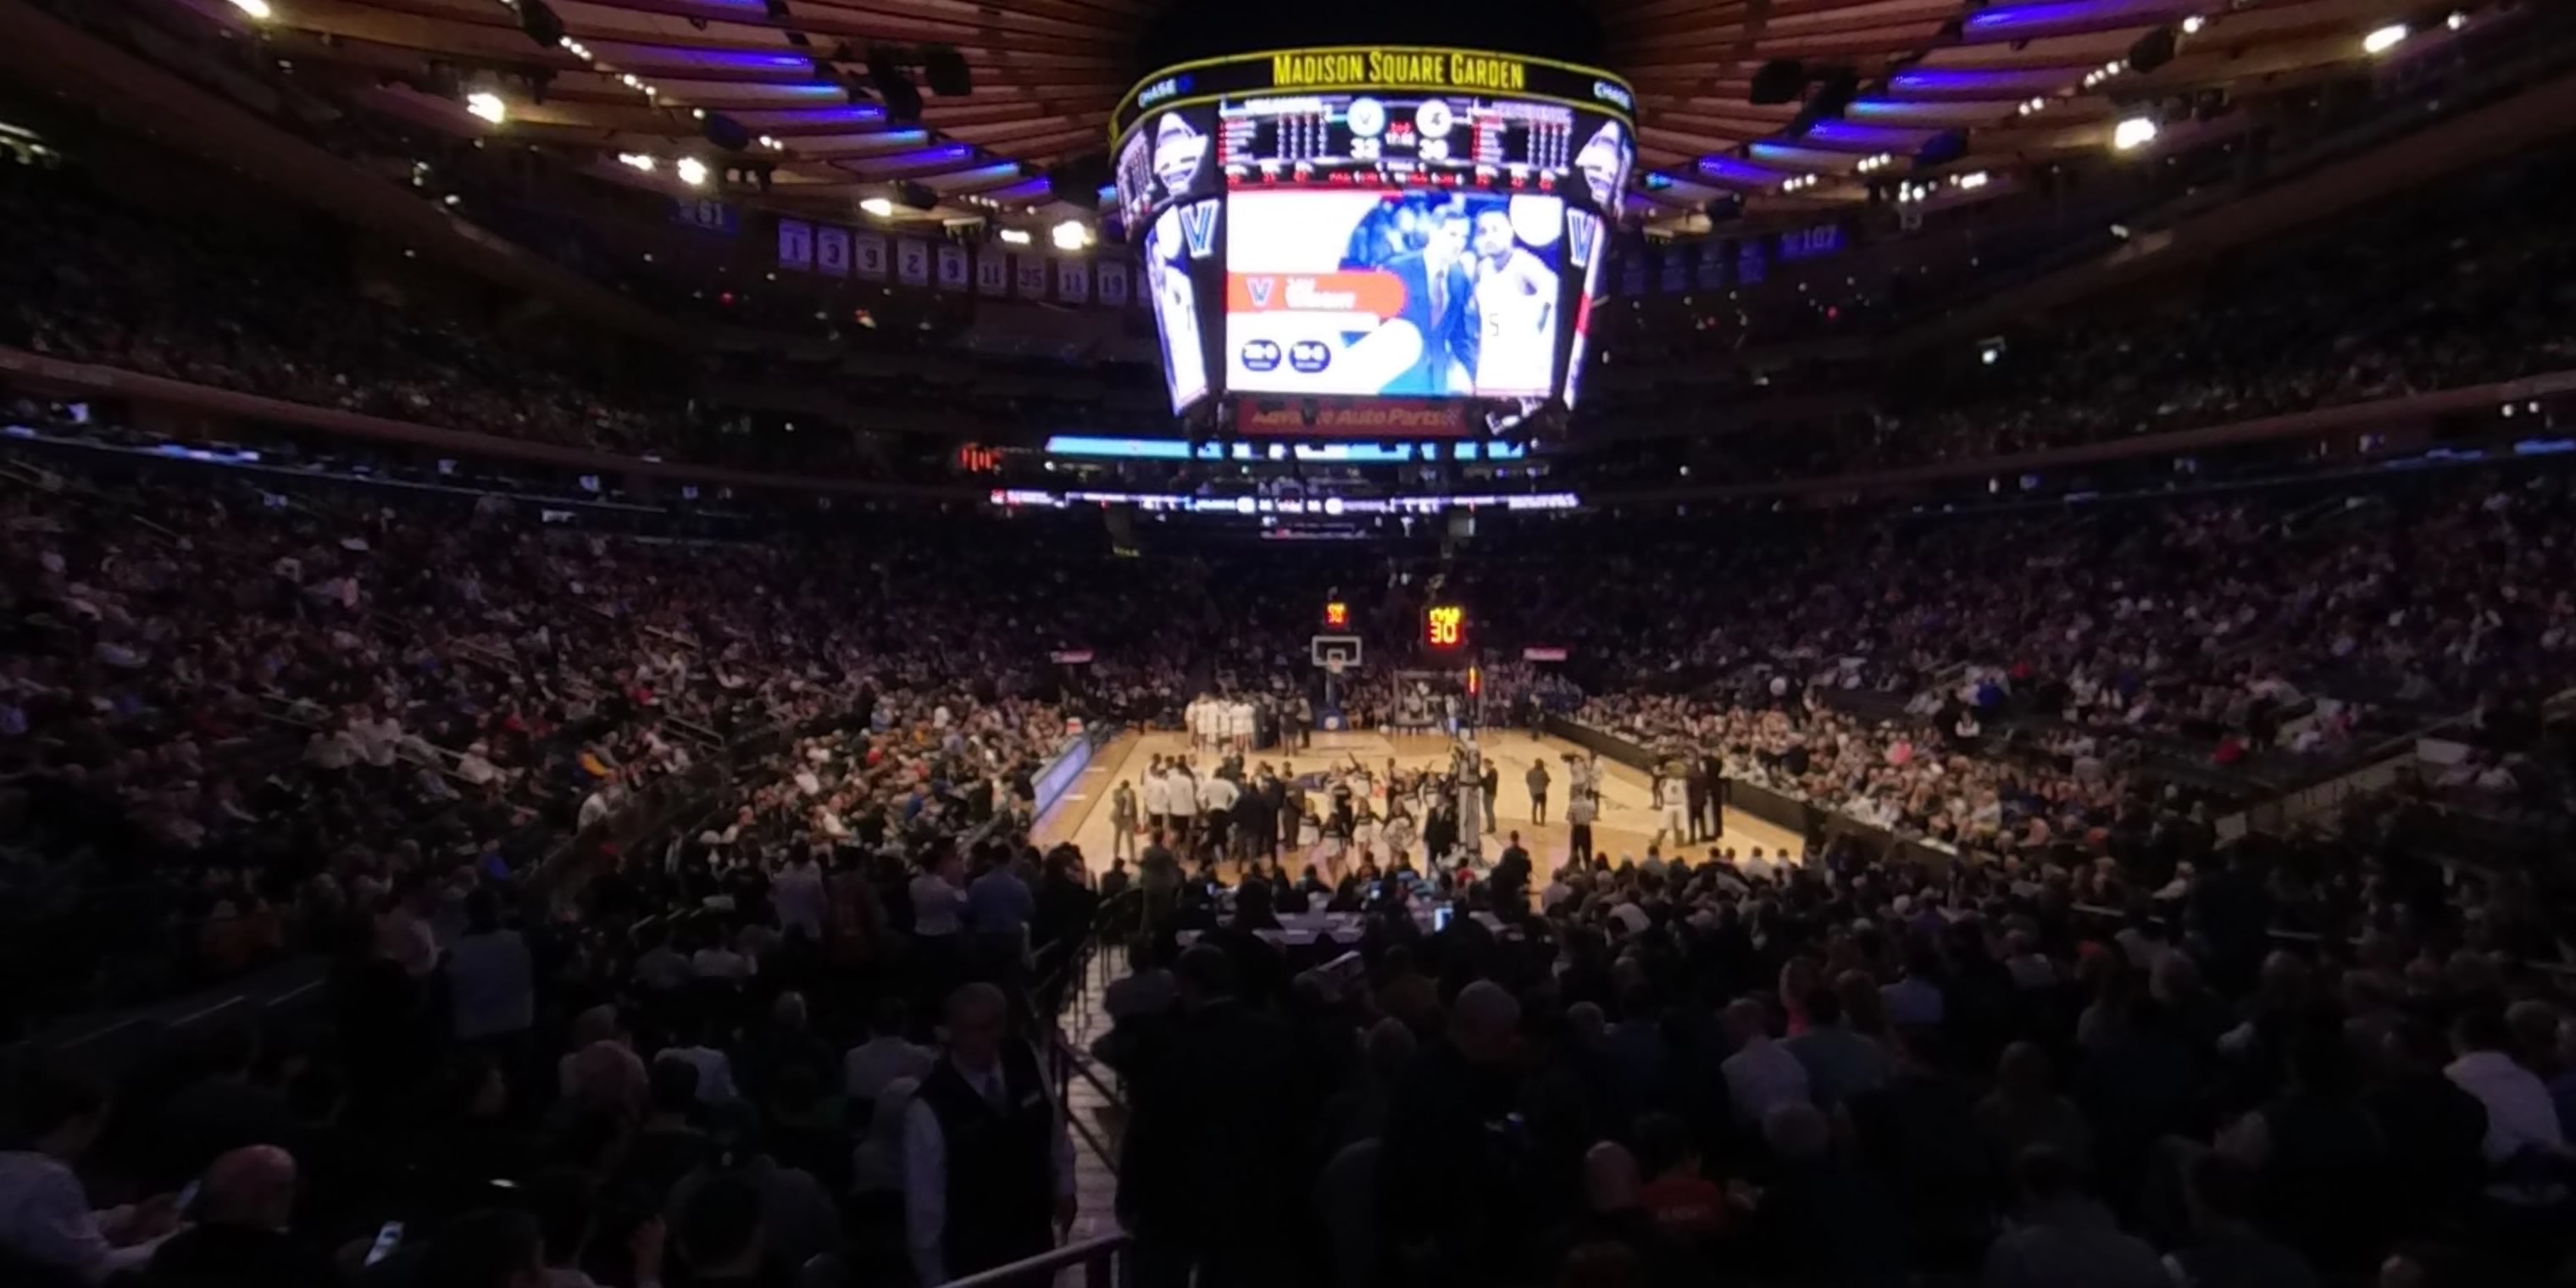 section 111 panoramic seat view  for basketball - madison square garden